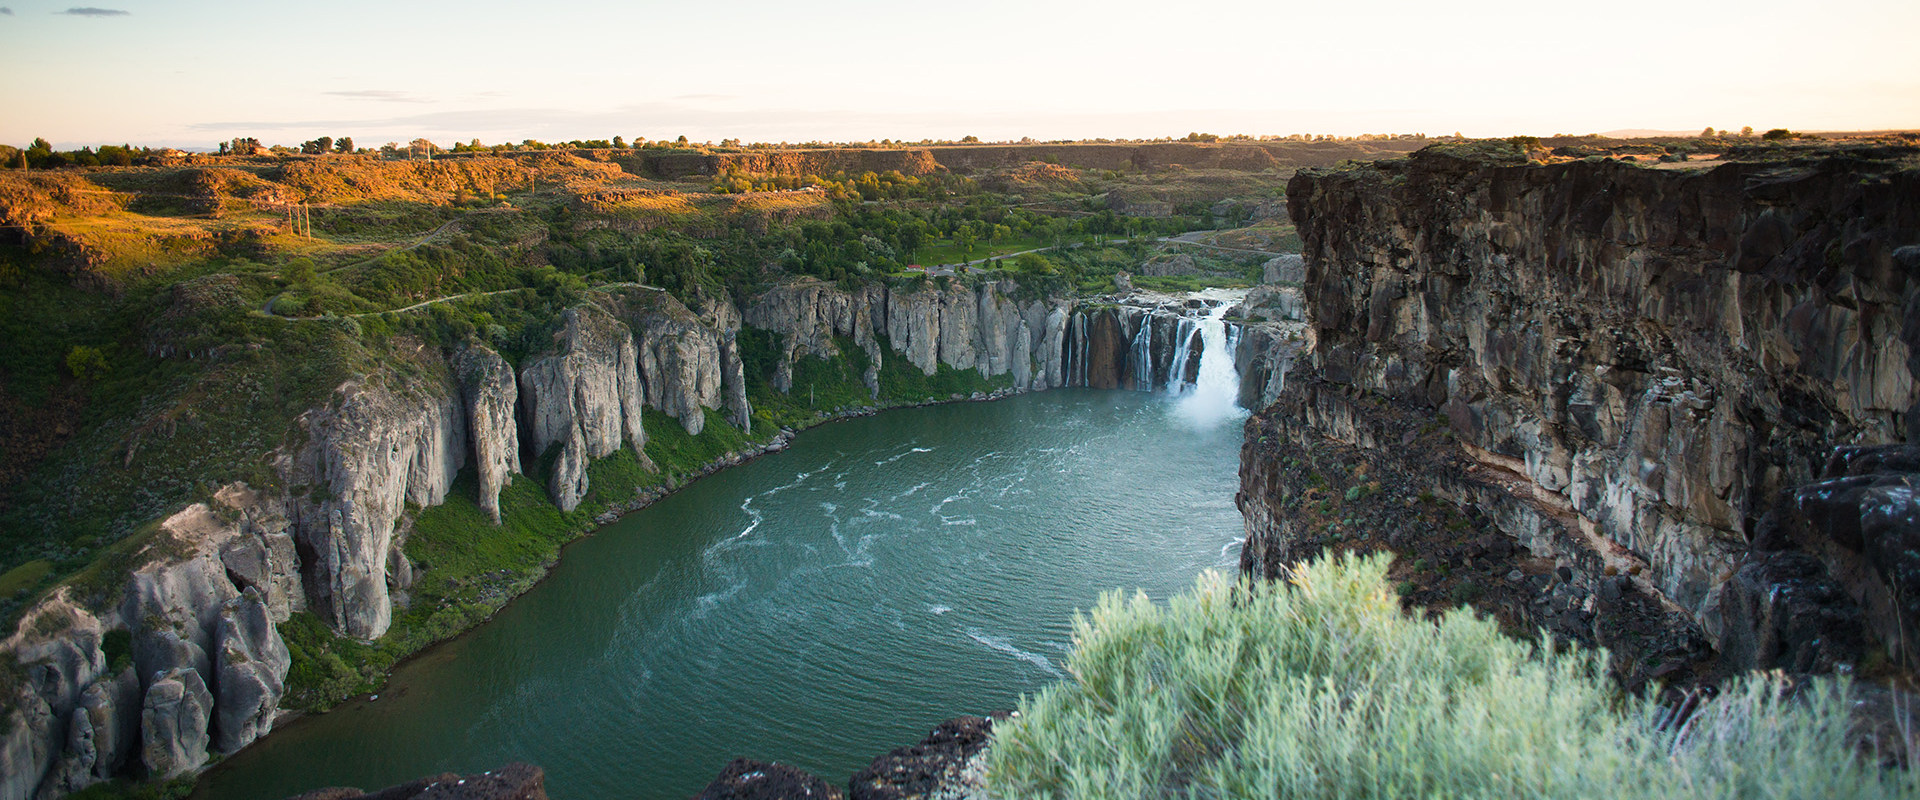 The Pros and Cons of Utilizing Energy Resources in Post Falls, Idaho